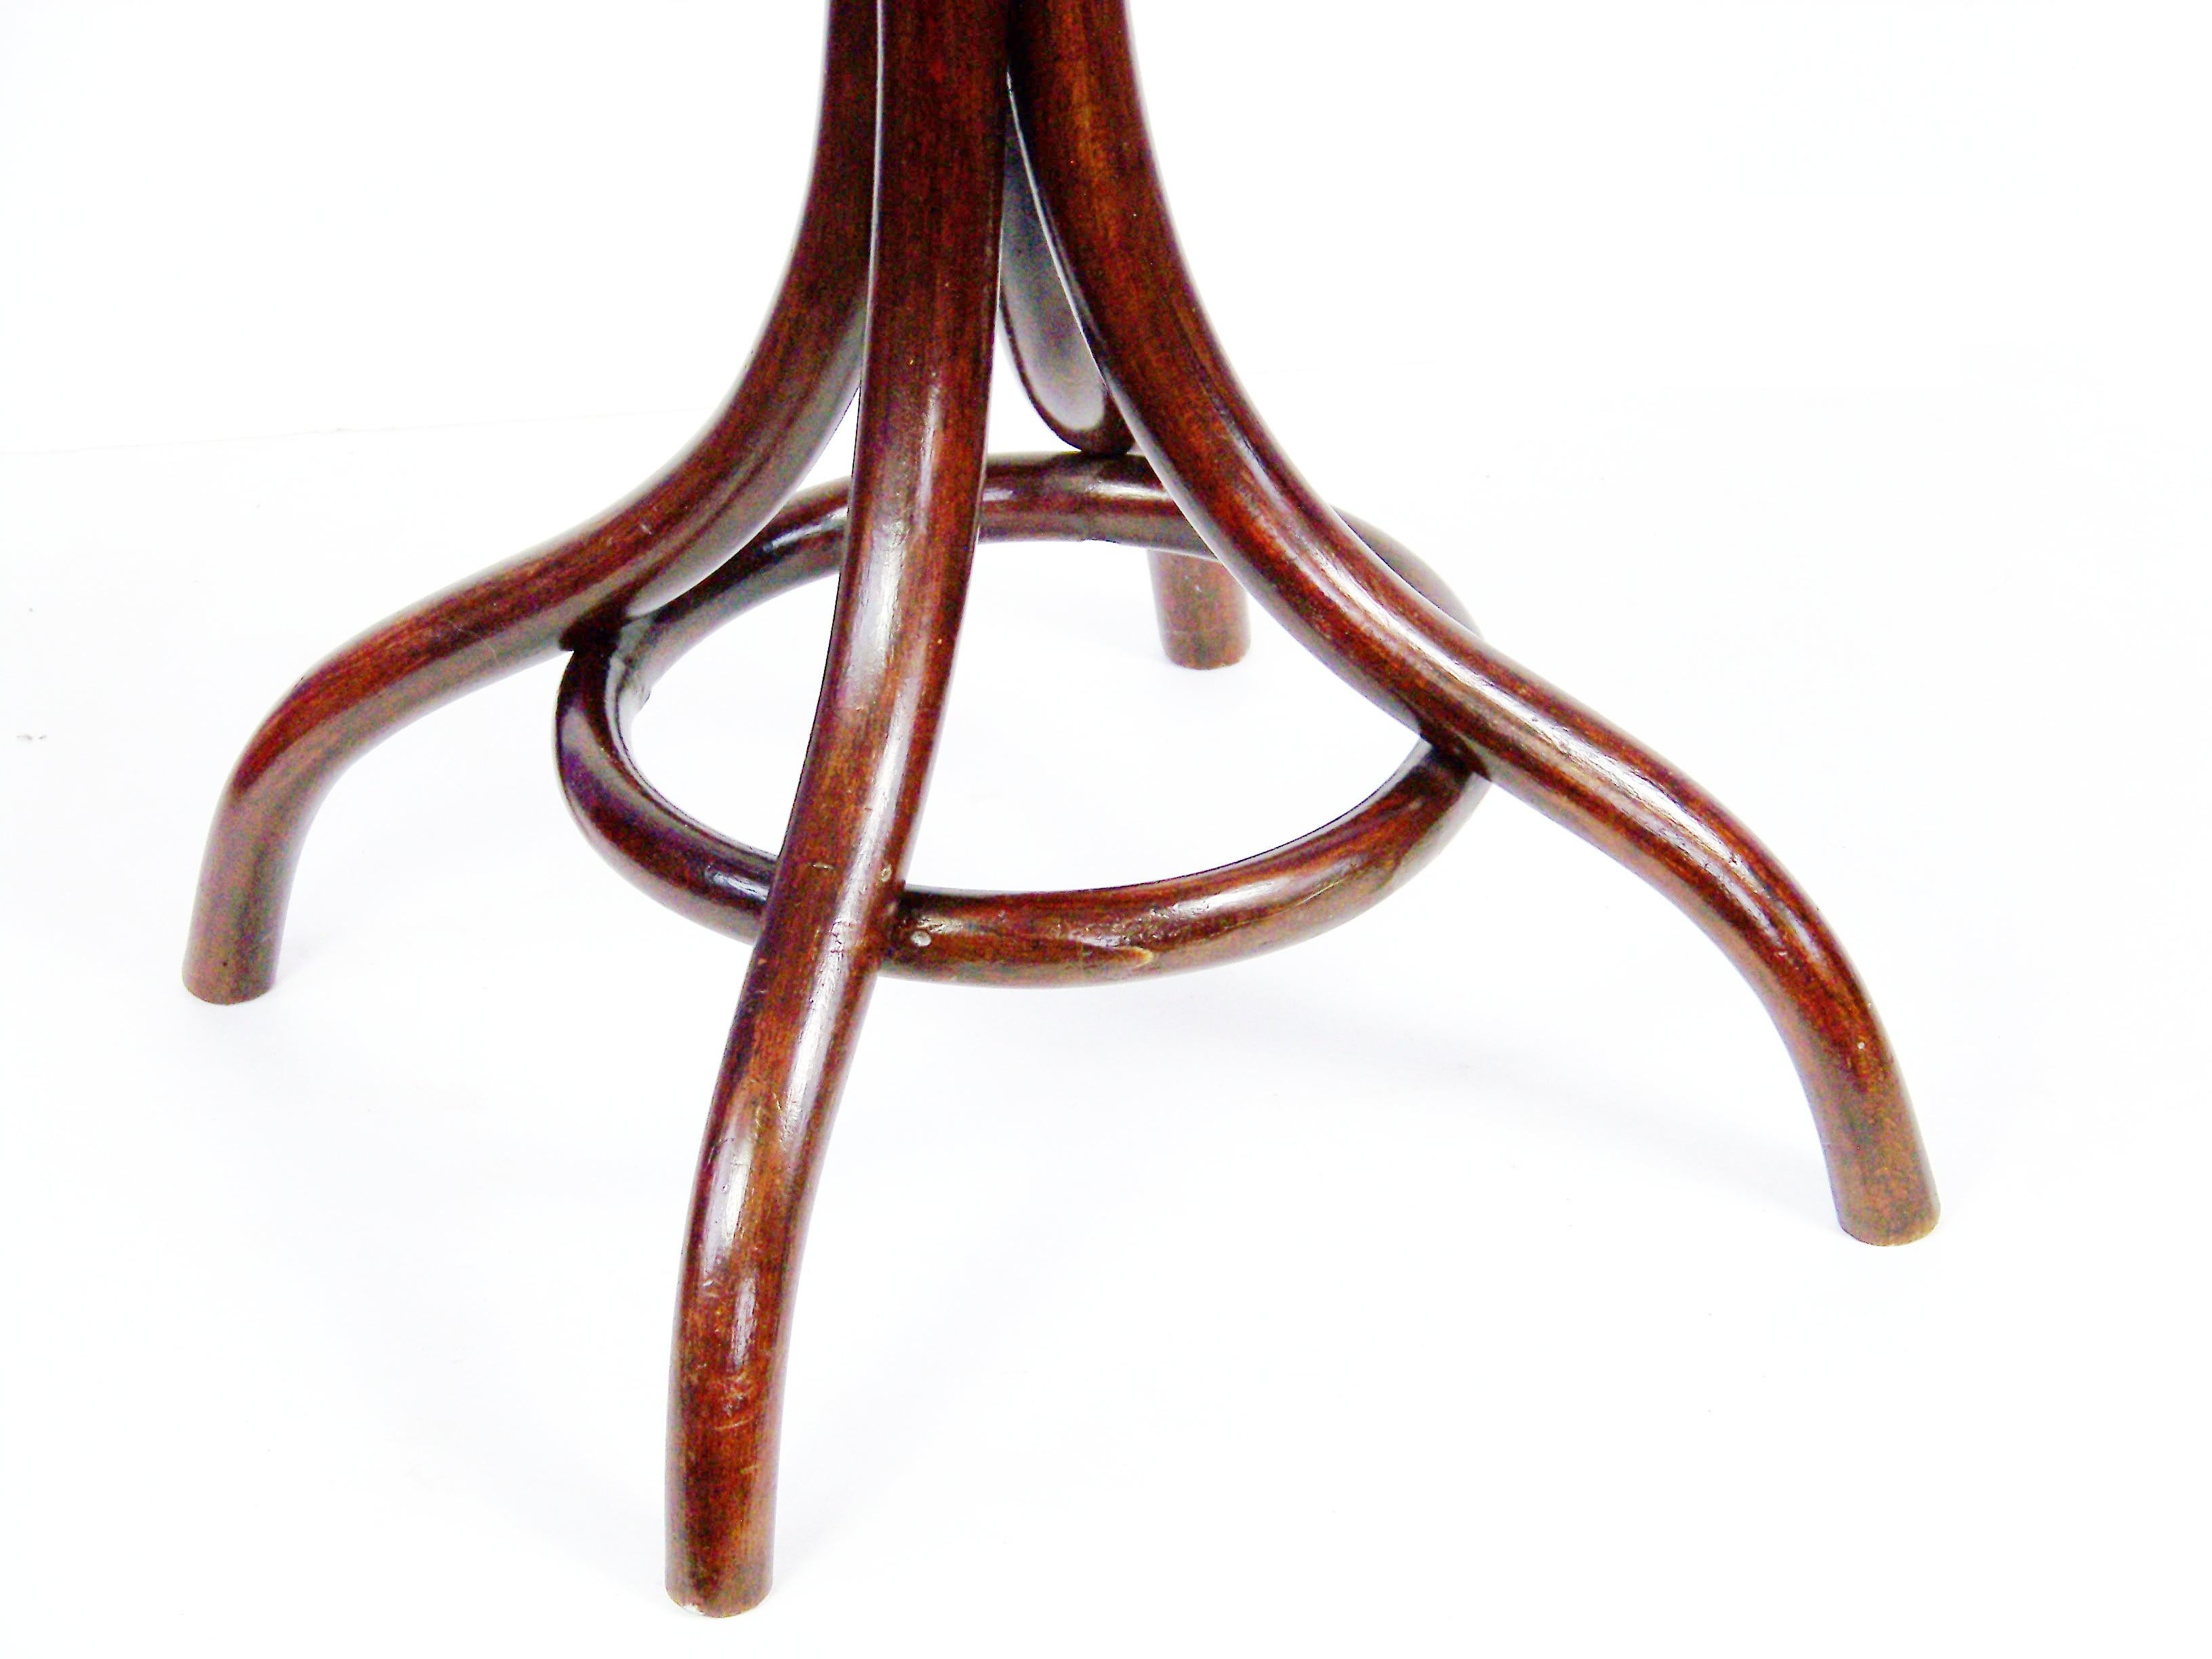 Art Nouveau Thonet Table Nr.1 with Waxed Cloth Covered, circa 1900